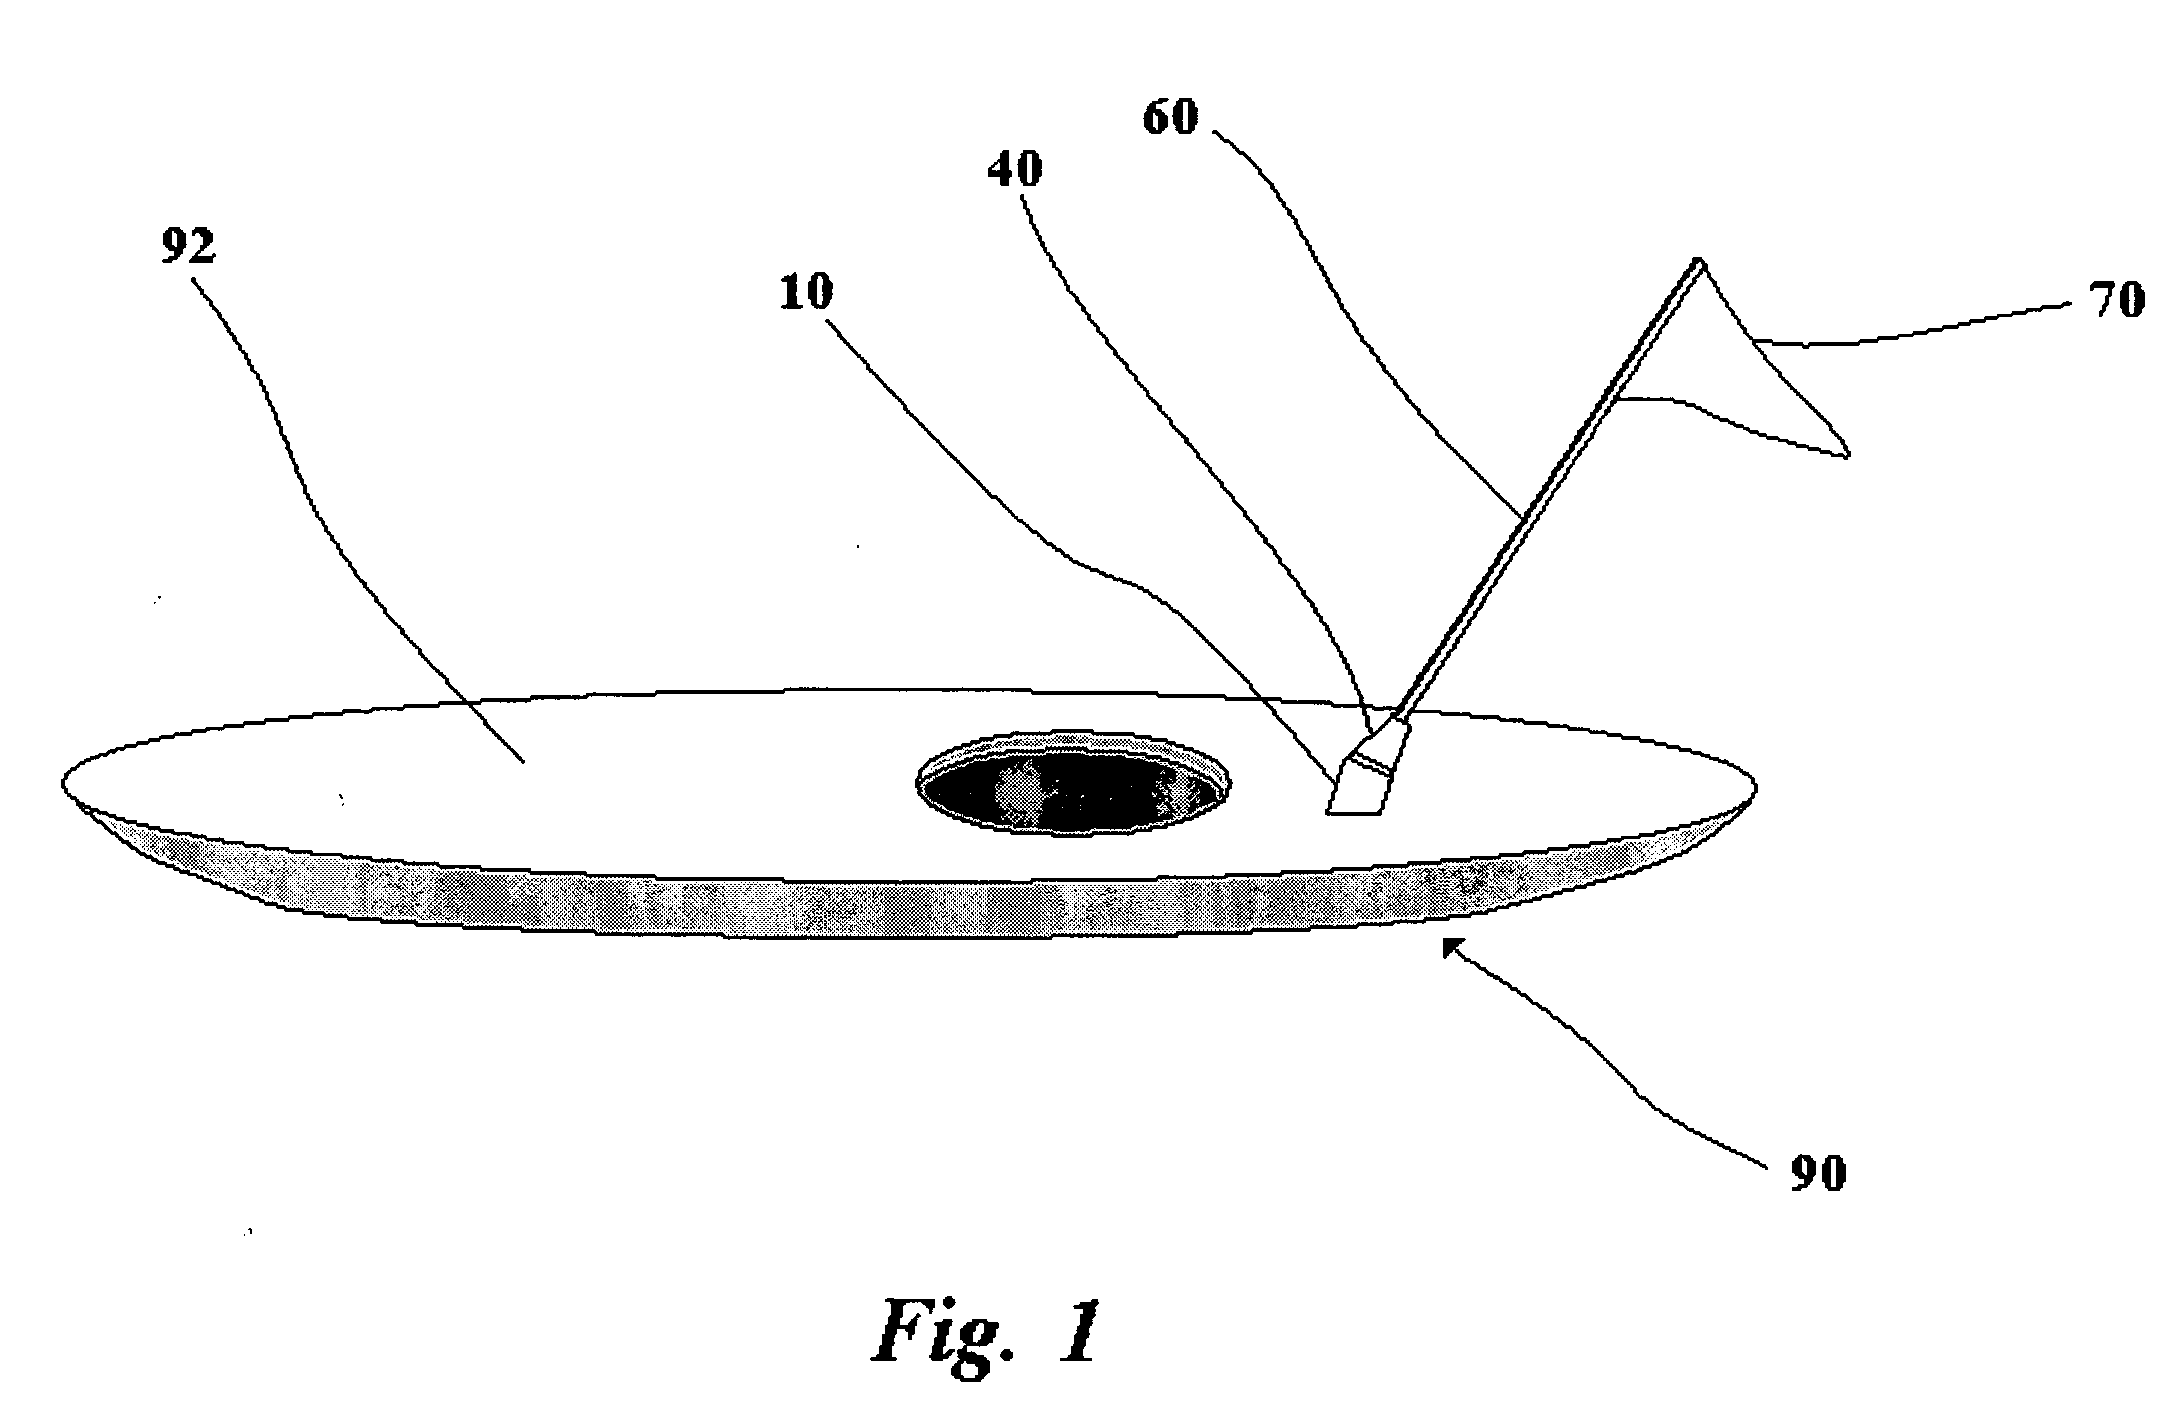 Safety signaling apparatus for watercraft